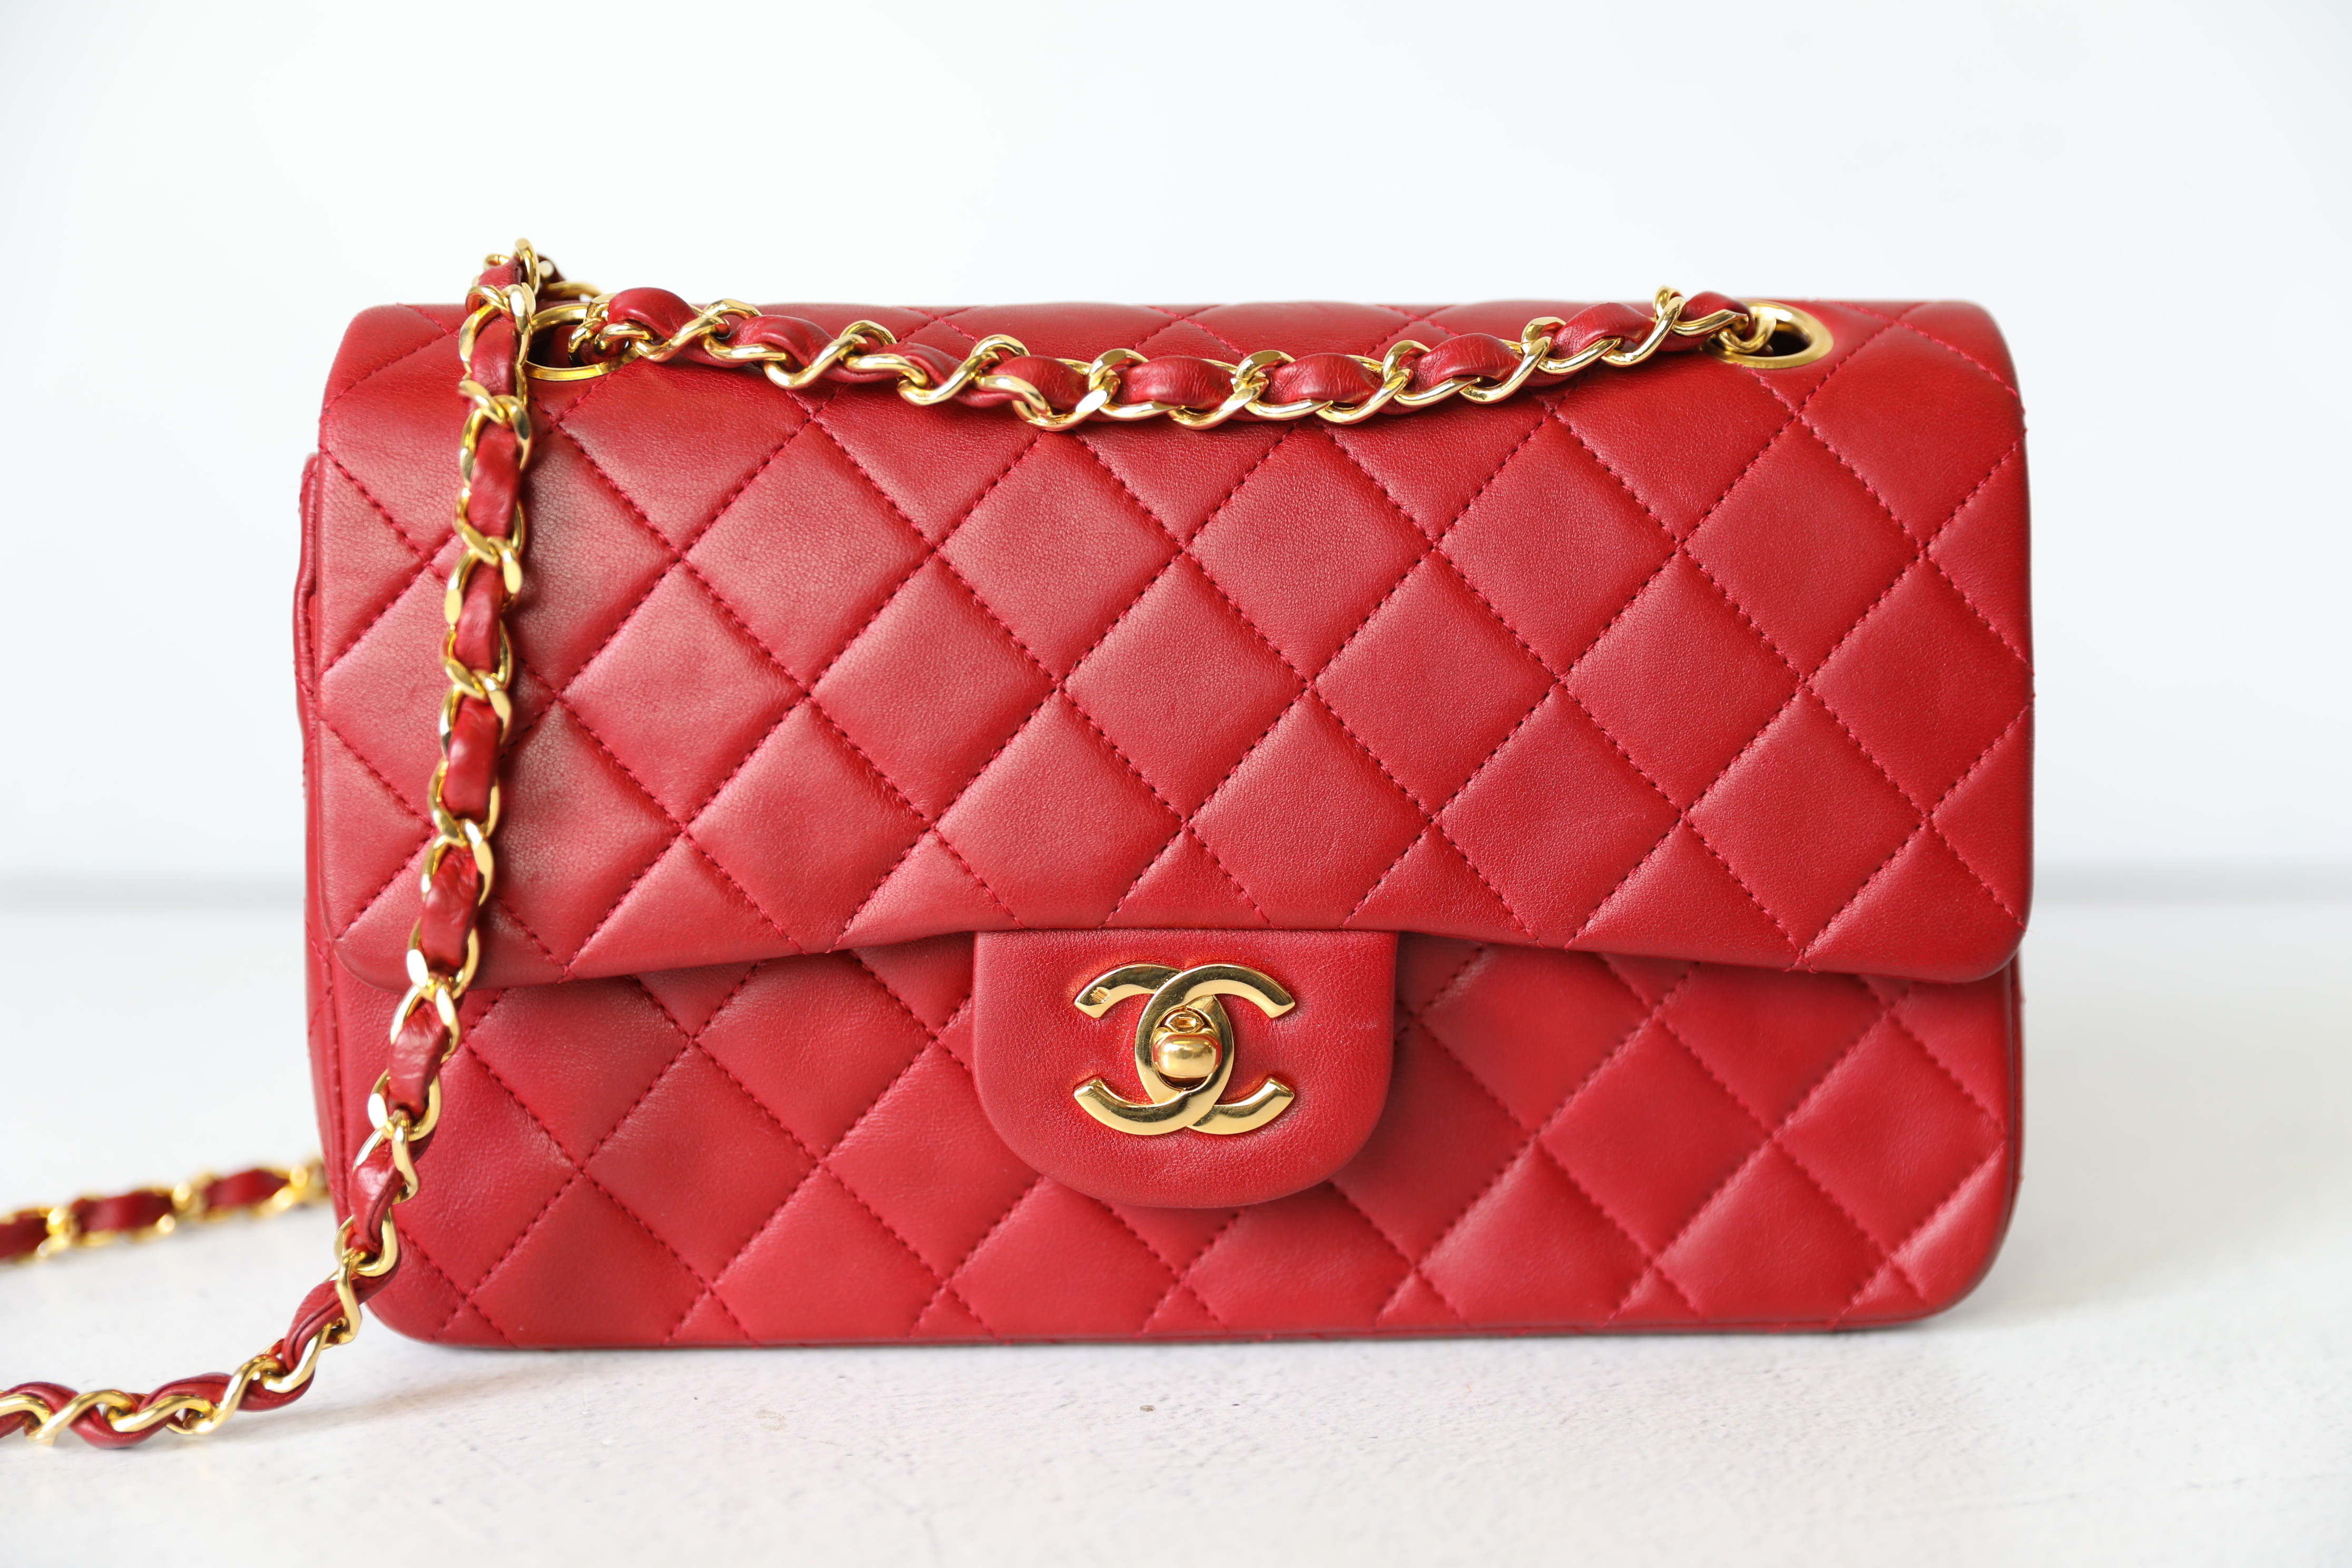 Chanel Vintage Medium, Red Lambskin with Gold Hardware, Preowned in Dustbag  WA001 - Julia Rose Boston